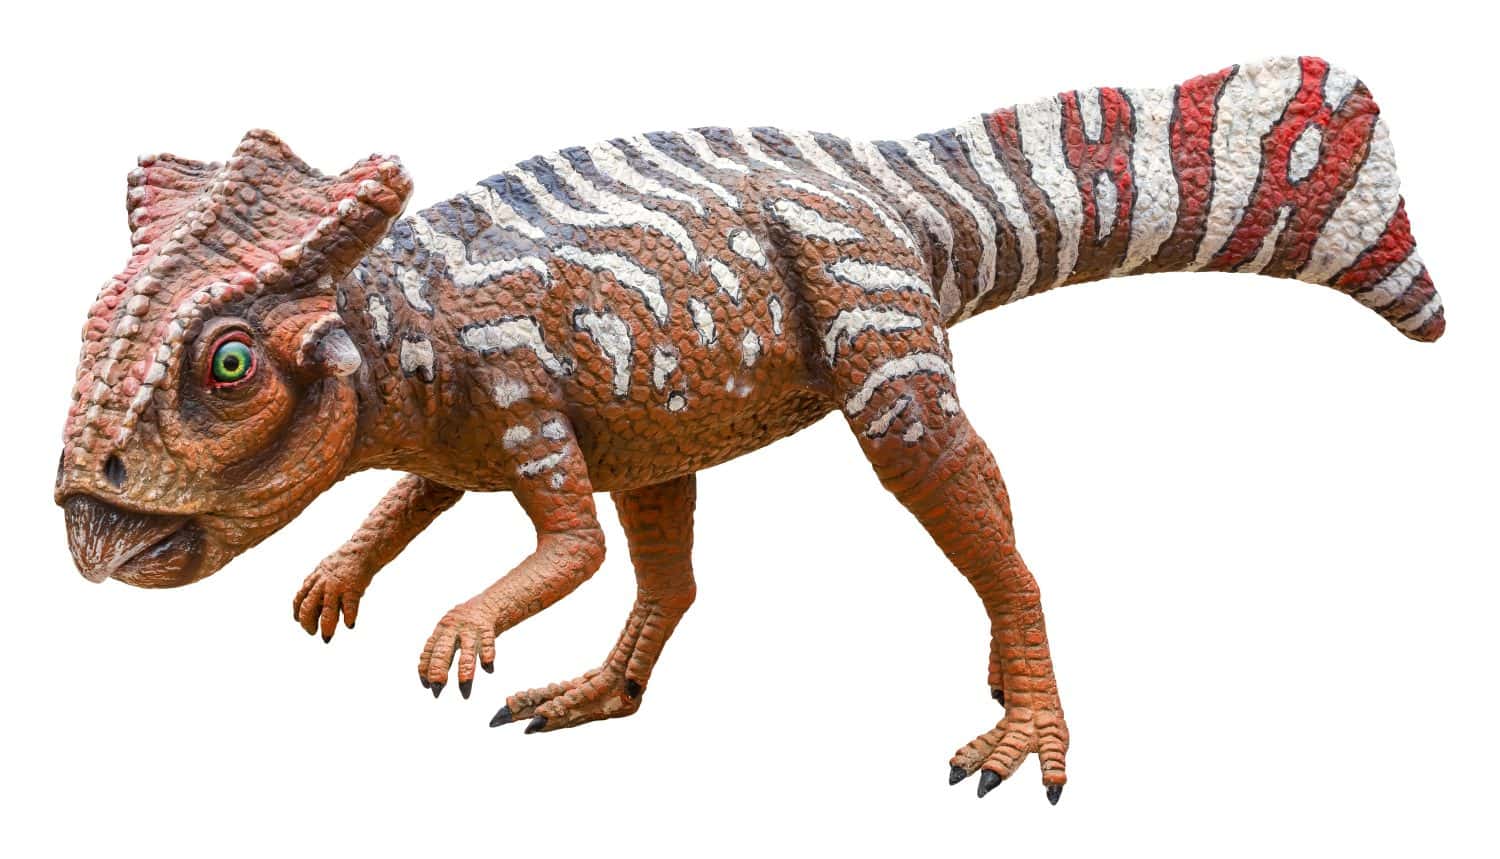 Koreaceratops is a herbivore genus of basal ceratopsian dinosaurs discovered in Albian-age Lower Cretaceous rocks of South Korea. Koreaceratops isolated on white background with clipping path.